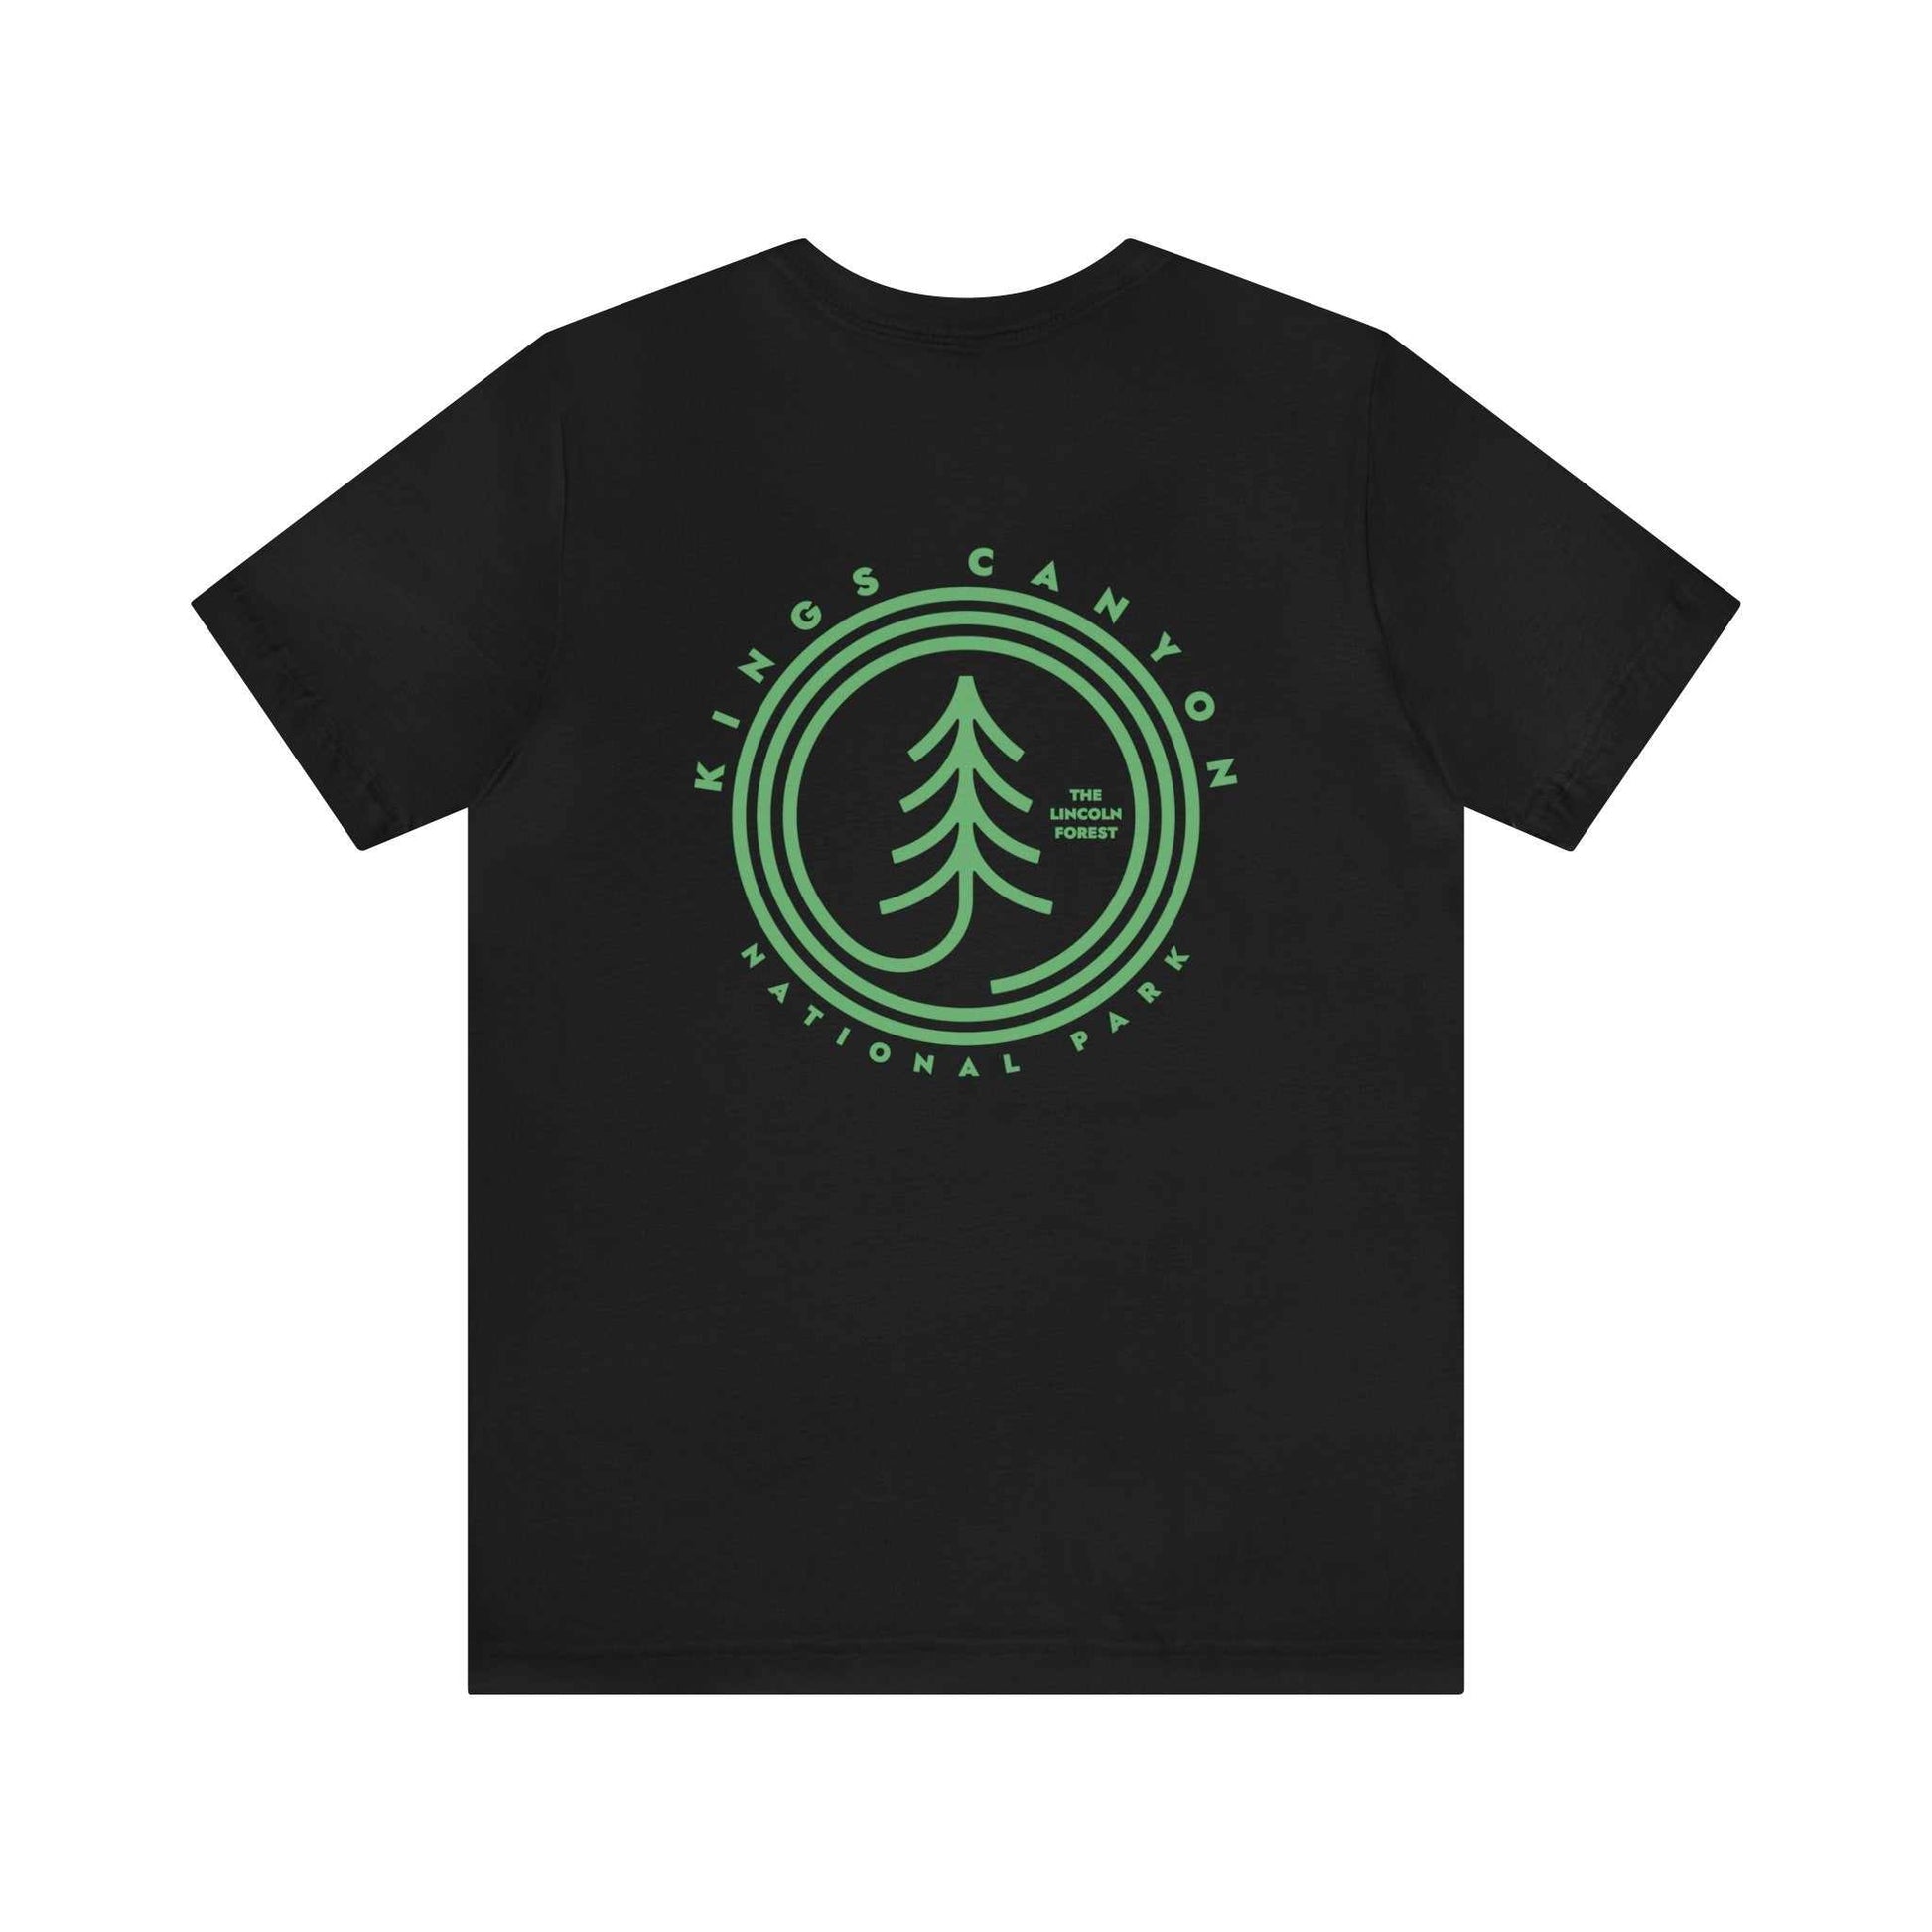 Kings Canyon National ShirtDetails:
- front and back design- 100% jersey cotton - light weight ultra soft fabric - unisex sizing
The Lincoln Forest cares deeply about the planet and creating a